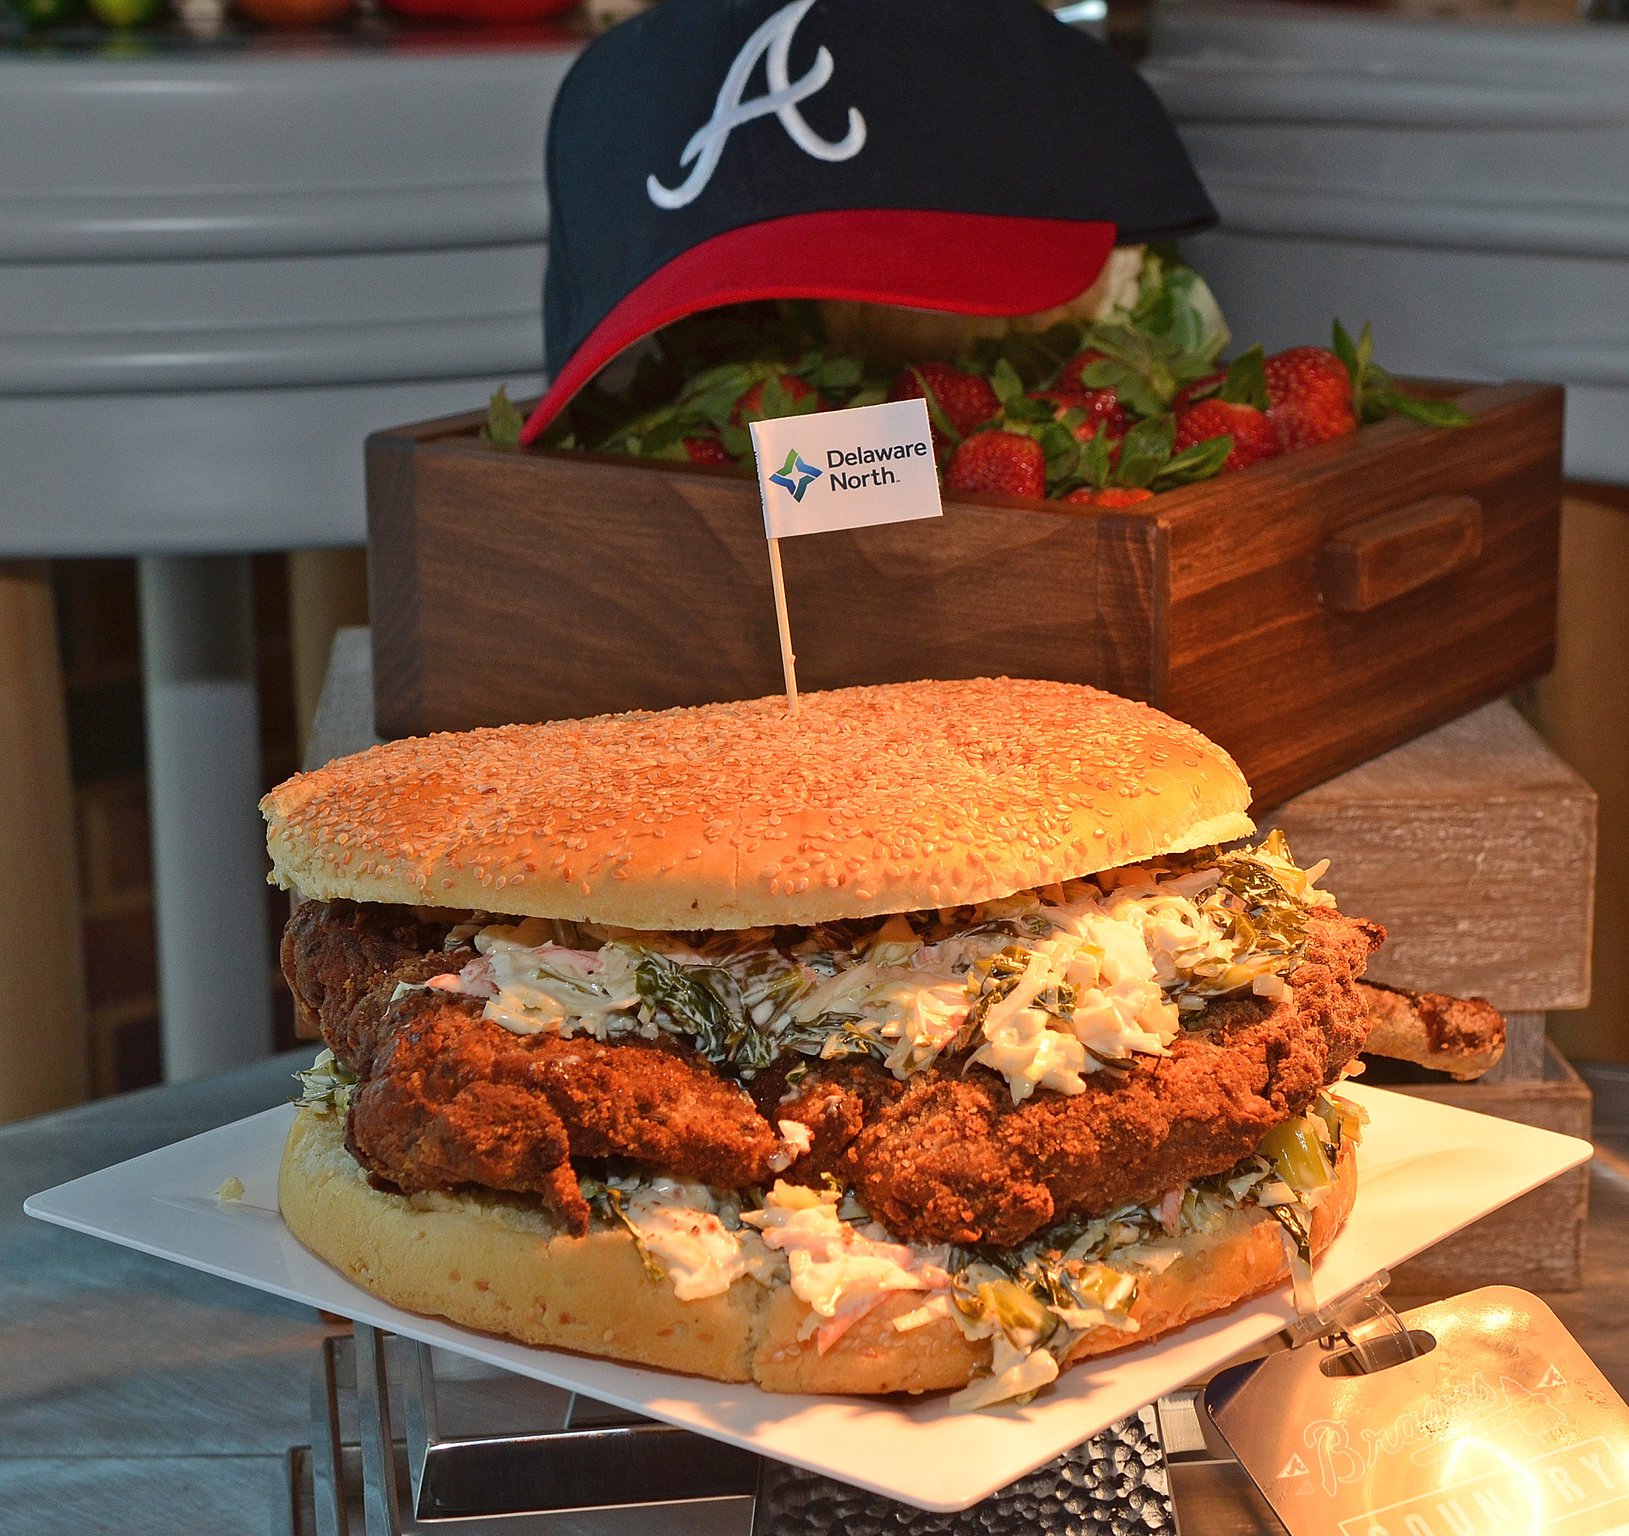 Where to Eat at Atlanta Braves Stadium Truist Park and Battery